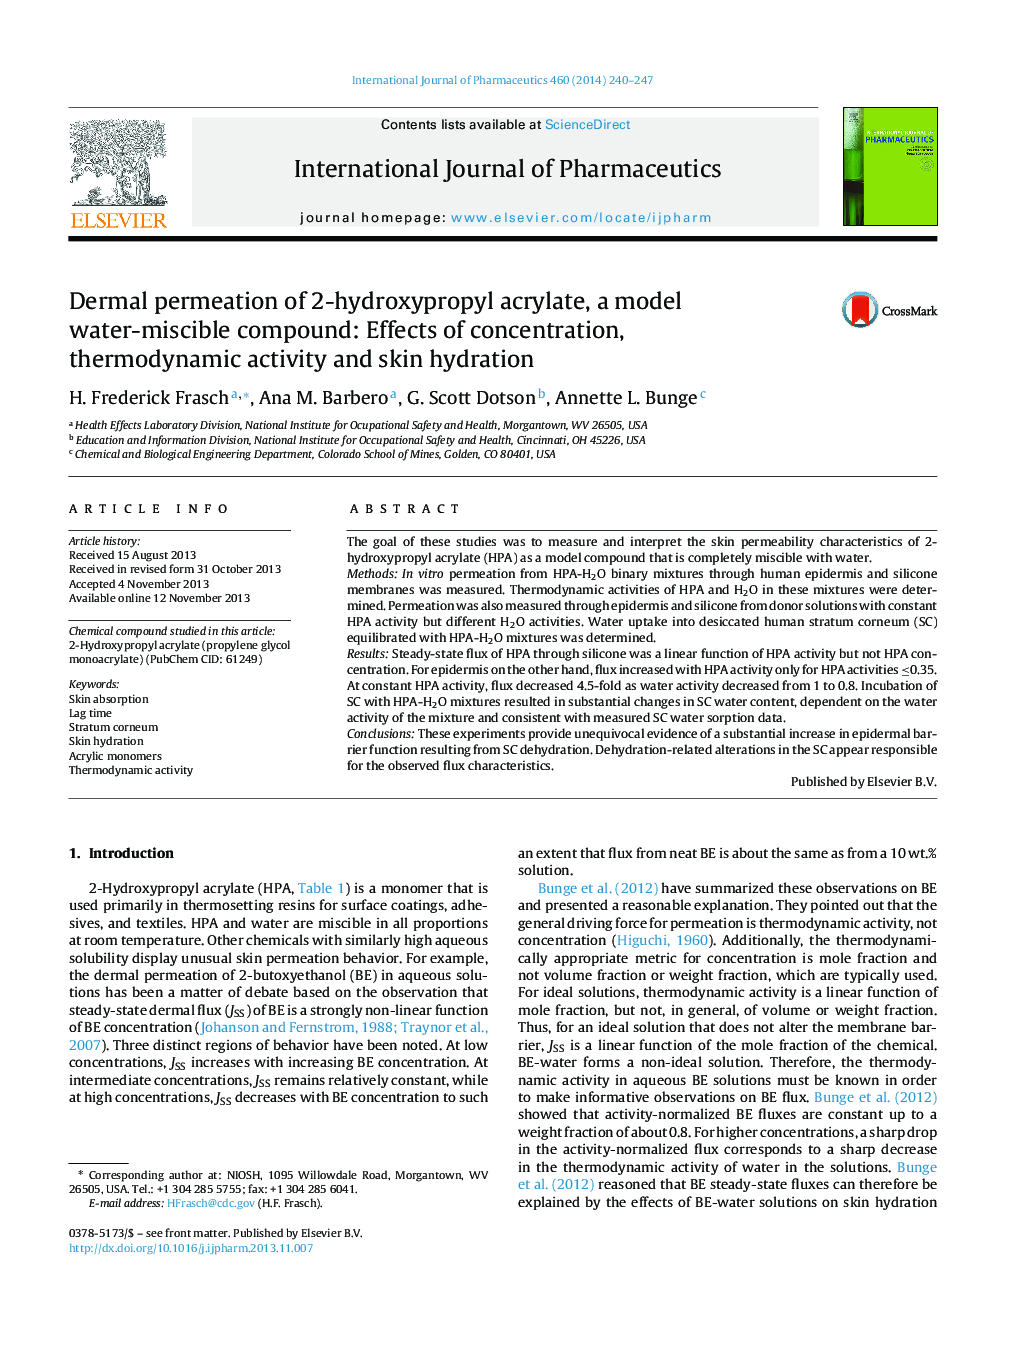 Dermal permeation of 2-hydroxypropyl acrylate, a model water-miscible compound: Effects of concentration, thermodynamic activity and skin hydration